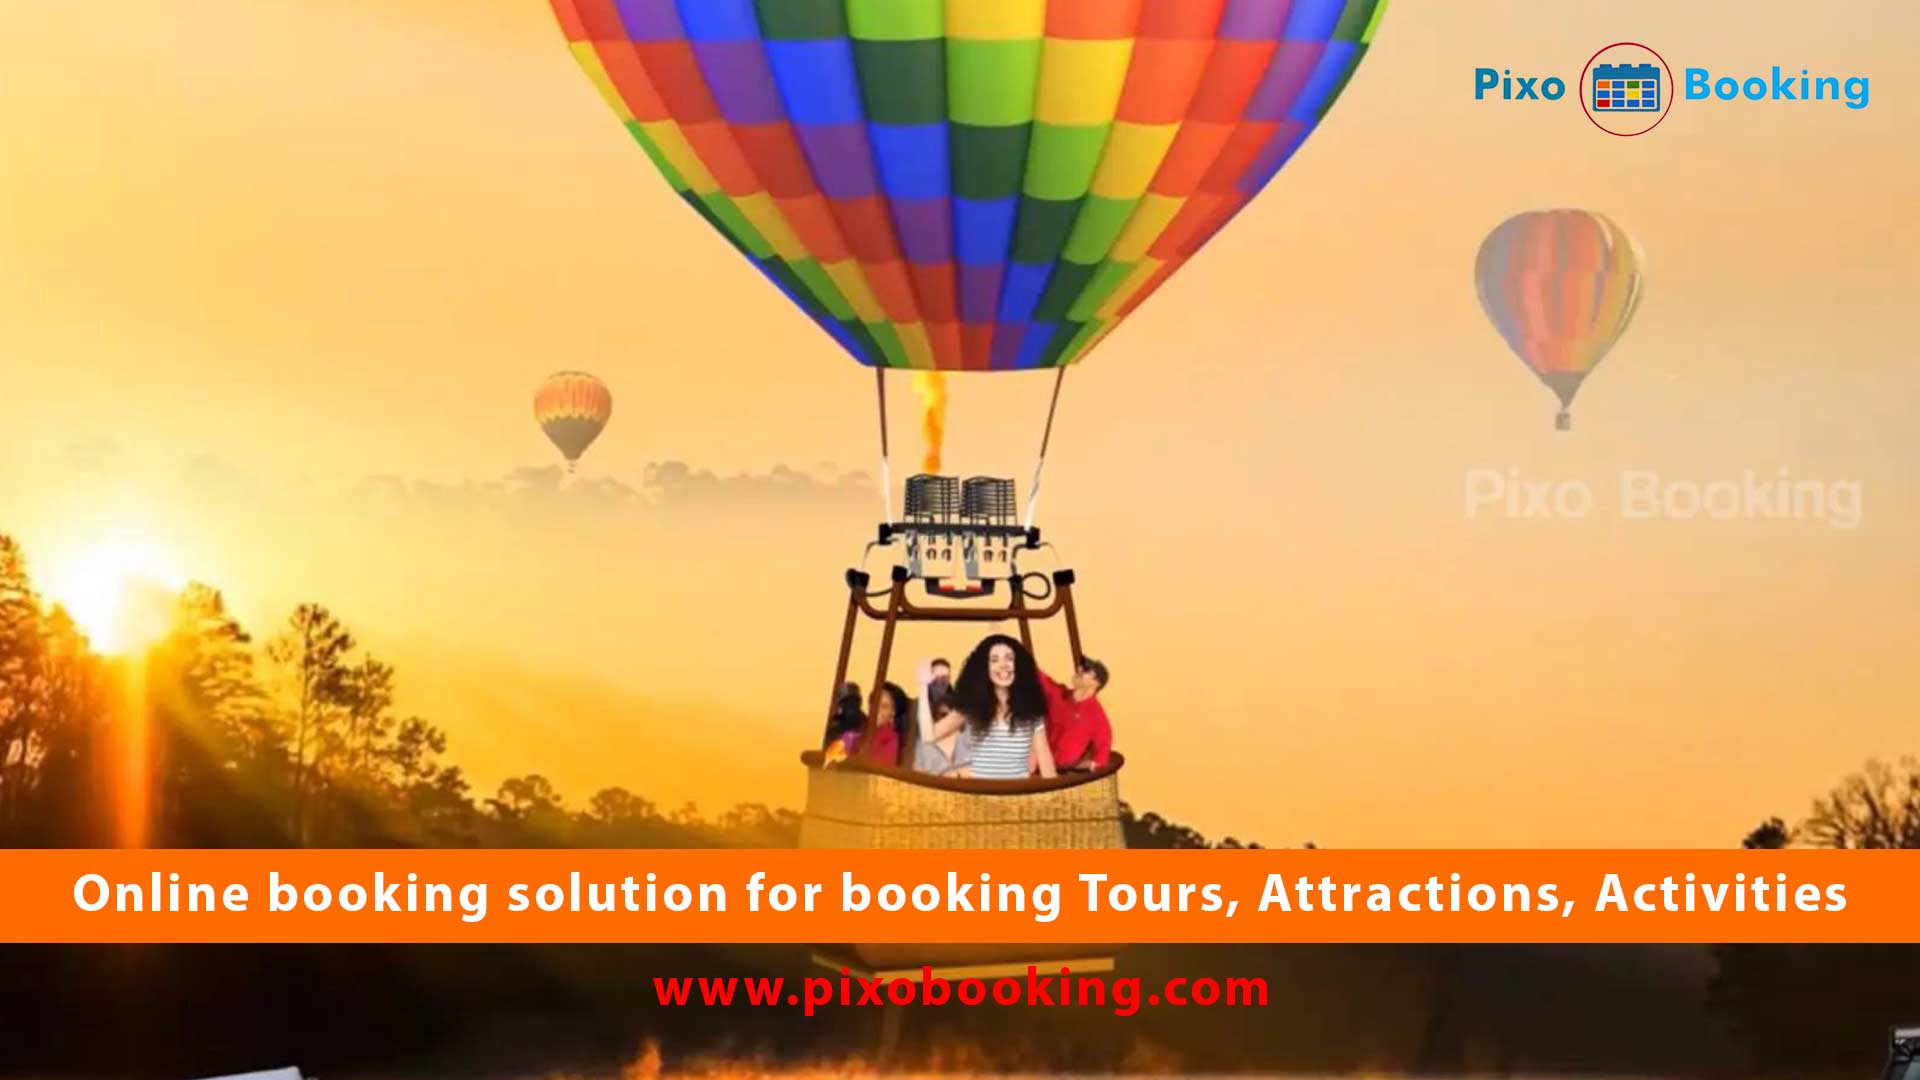 Tour booking software pricing | Activity booking software pricing